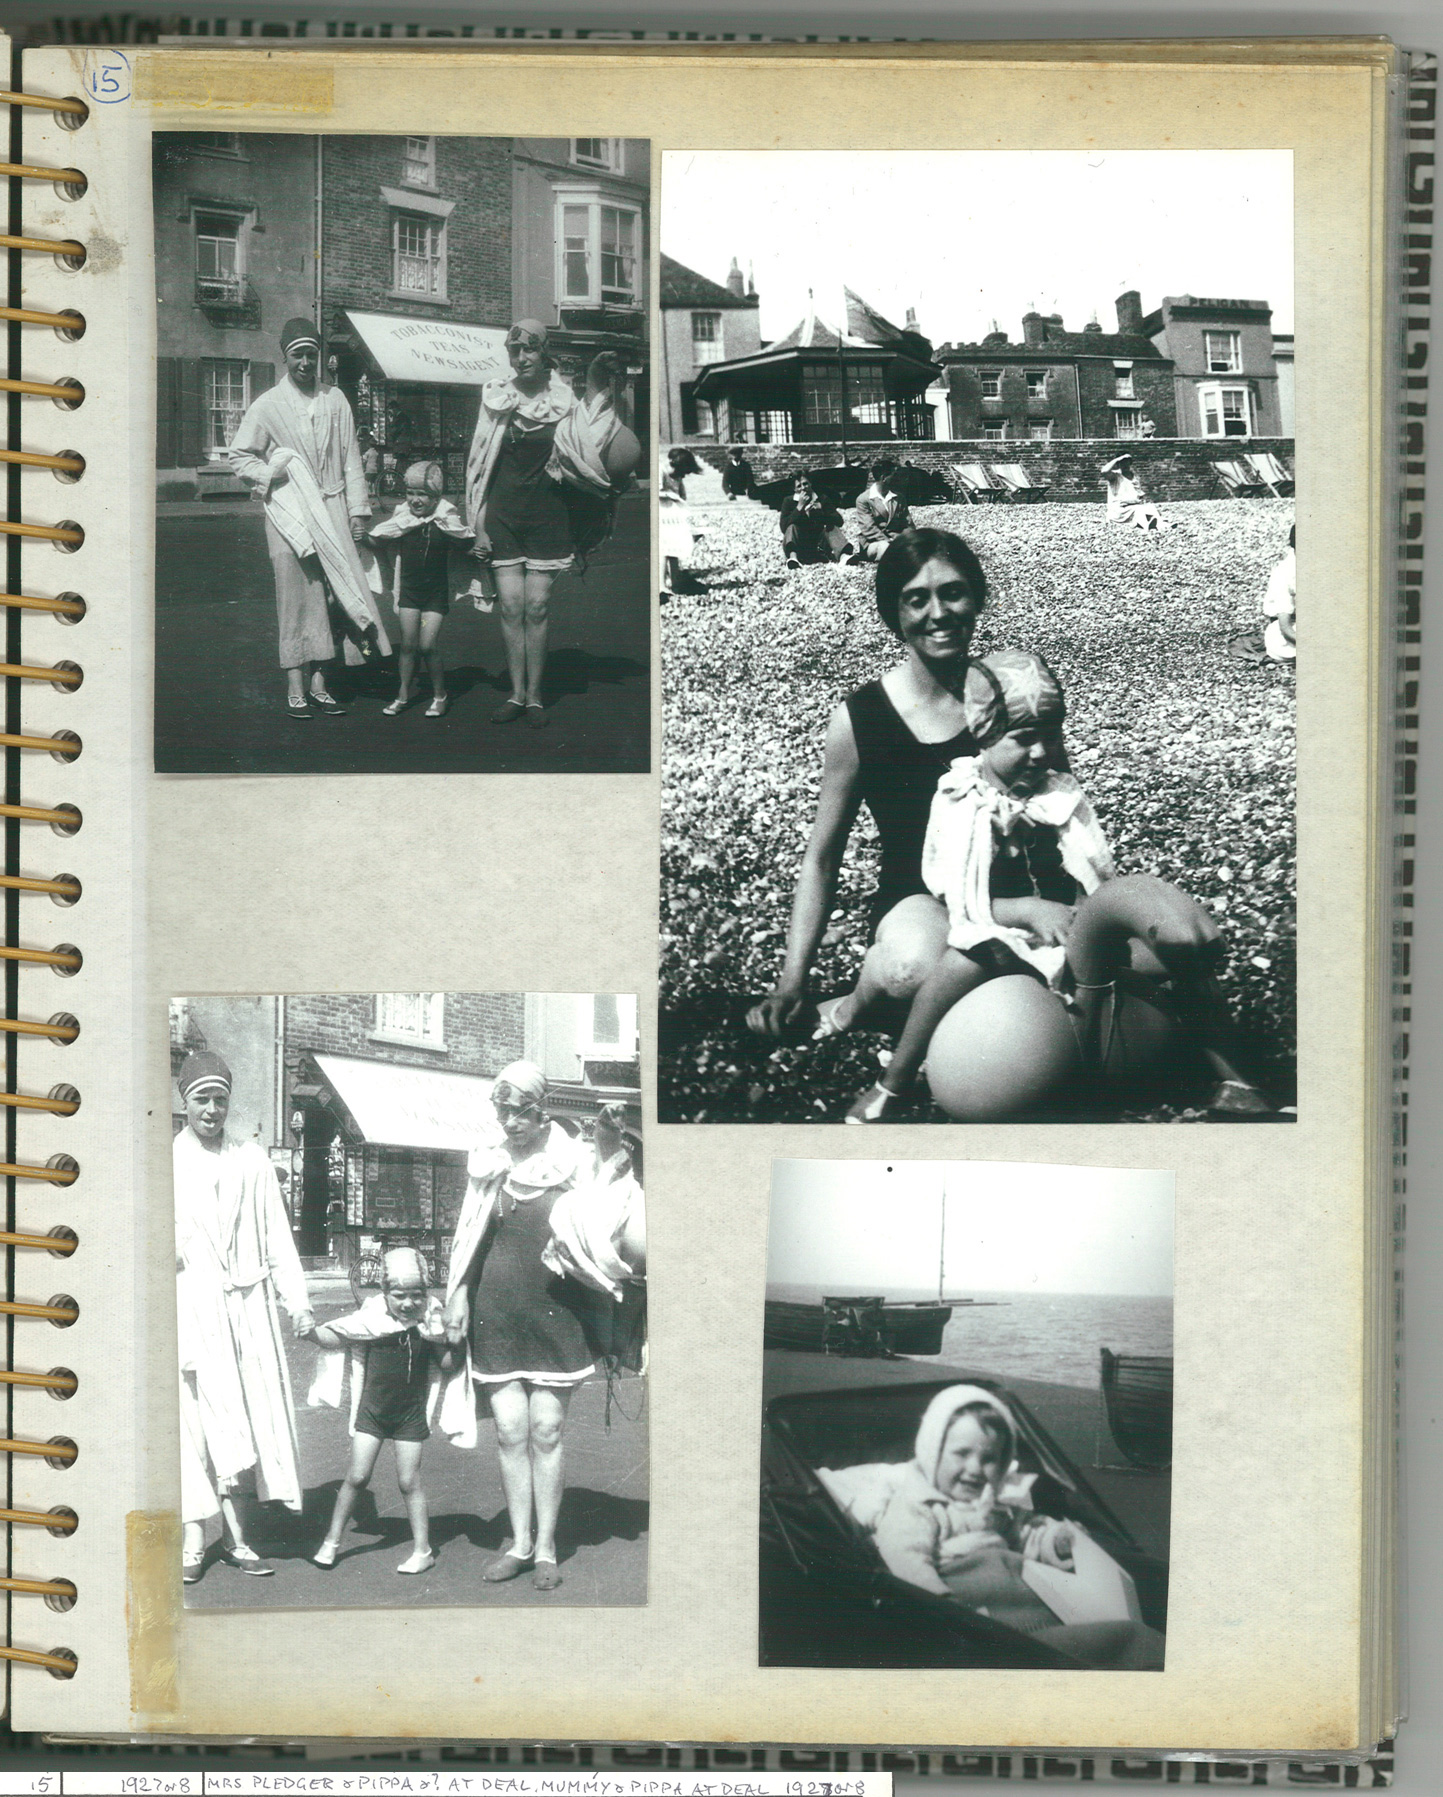 P15: Mrs Pledger and Pippa Bearman, and Ethel and Pippa at Deal, Kent, 1927/8